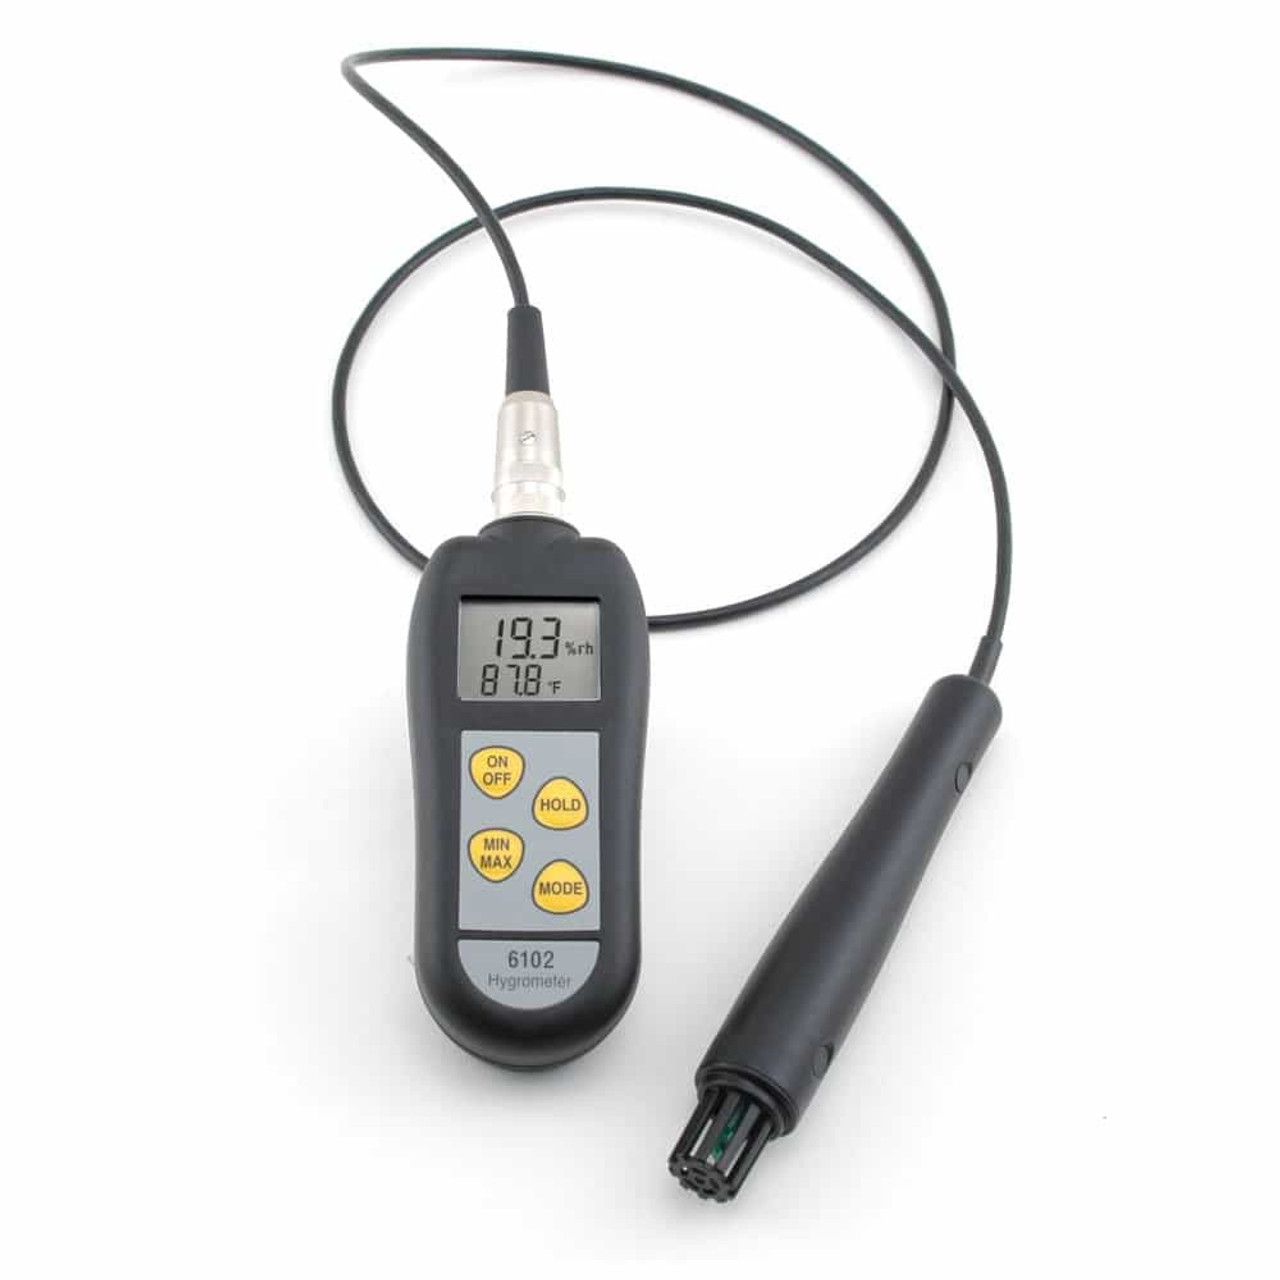 Thrive Thermometer & Hygrometer with Probe (1 ct)